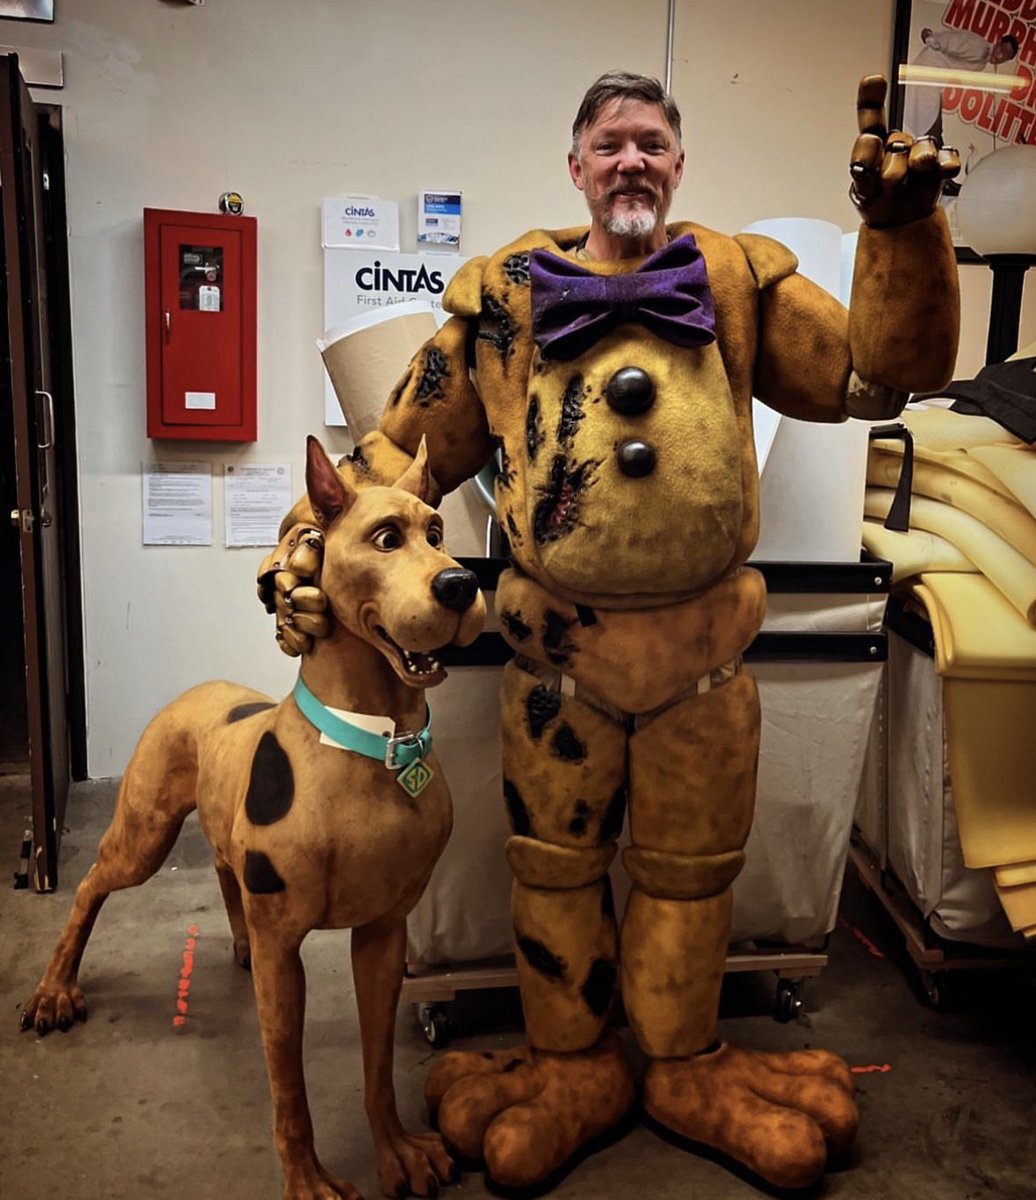 Matthew Lillard in his Springtrap costume celebrating the release date of 'FIVE NIGHTS OF FREDDYS 2' with the live-action Scooby Doo puppet. The film releases in theaters on December 5, 2025.